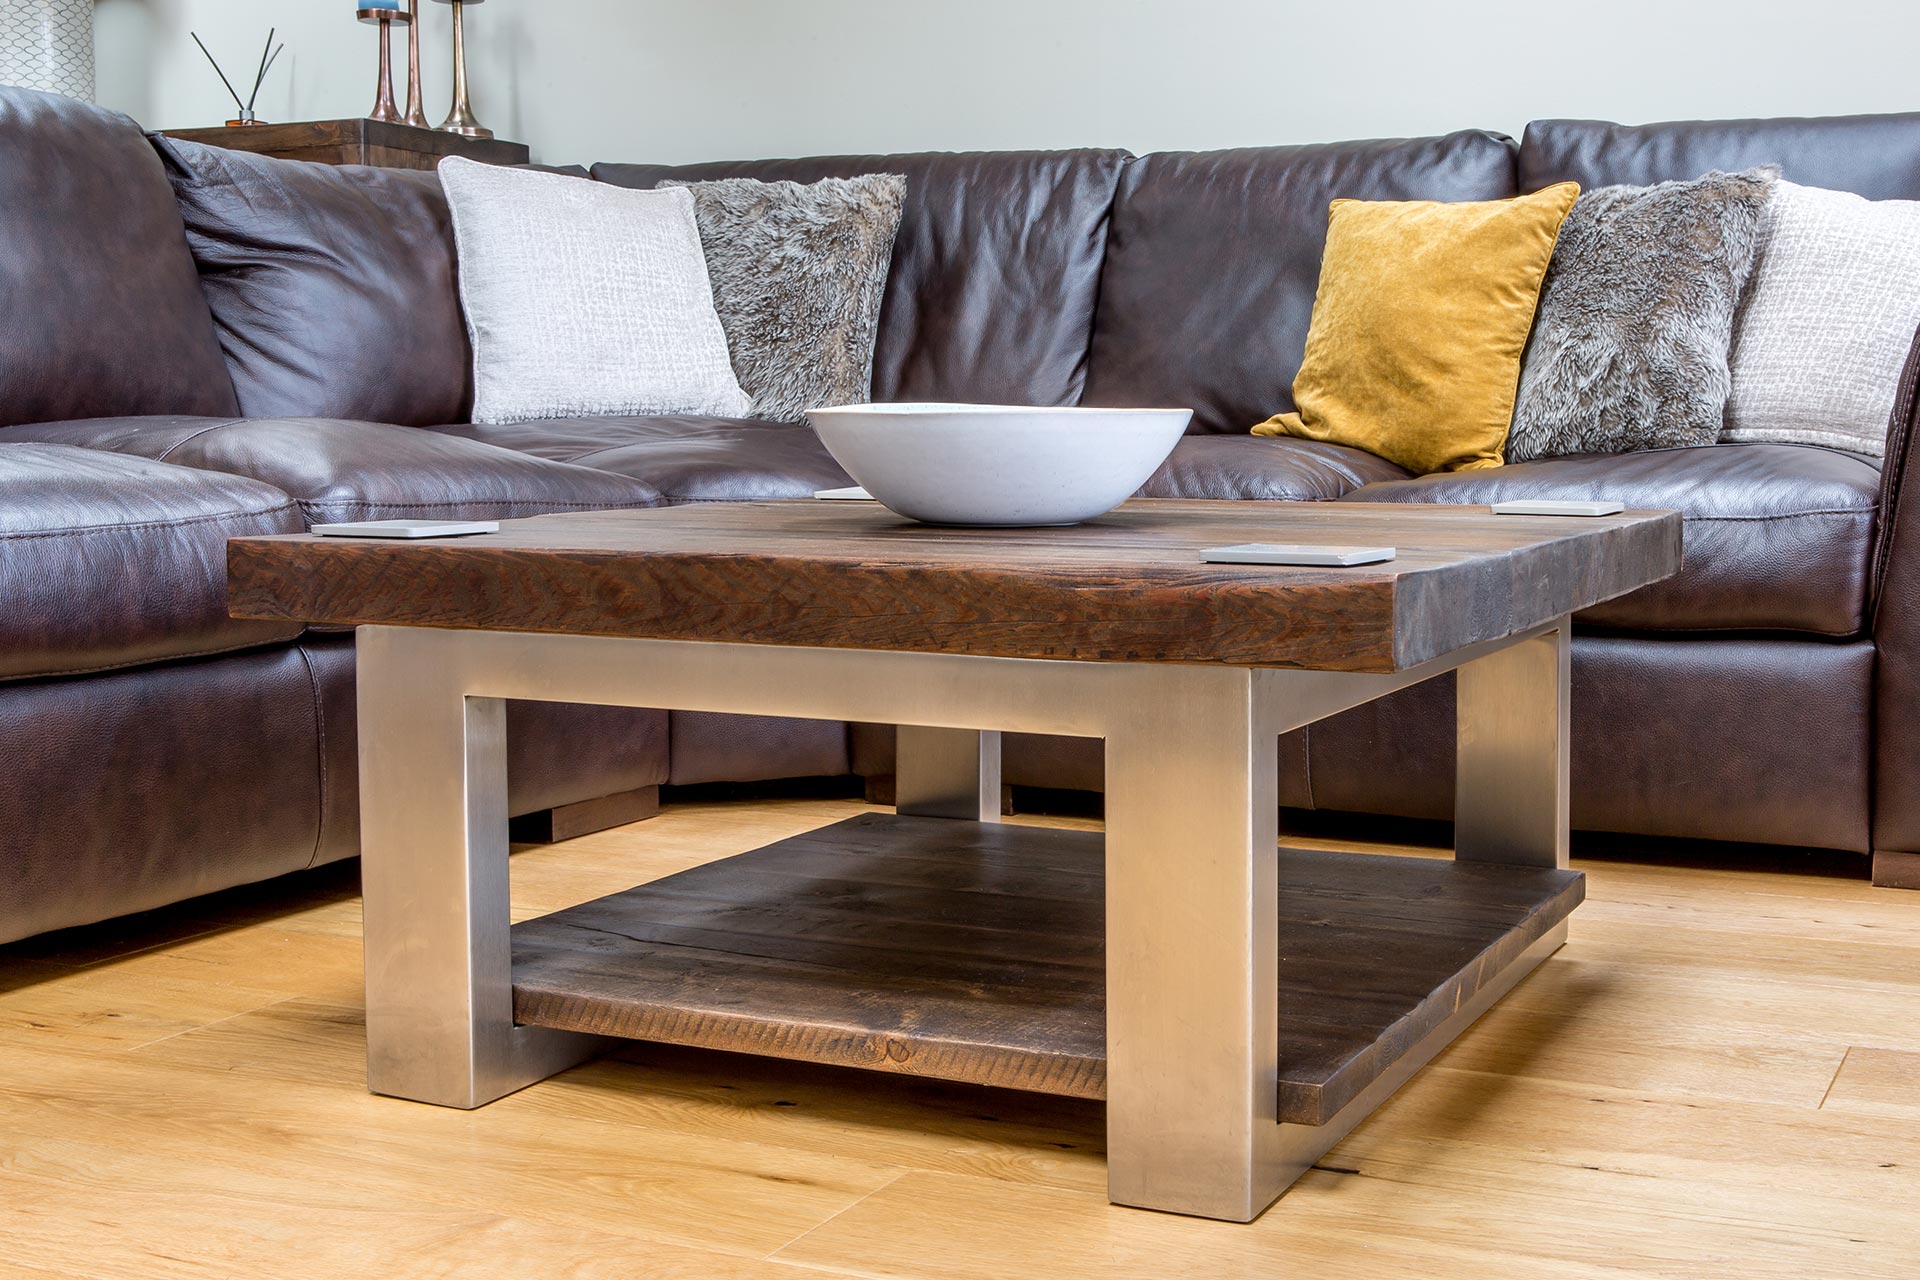 How to Choose the Right Coffee Table for Your Living Room - 2022 Guide